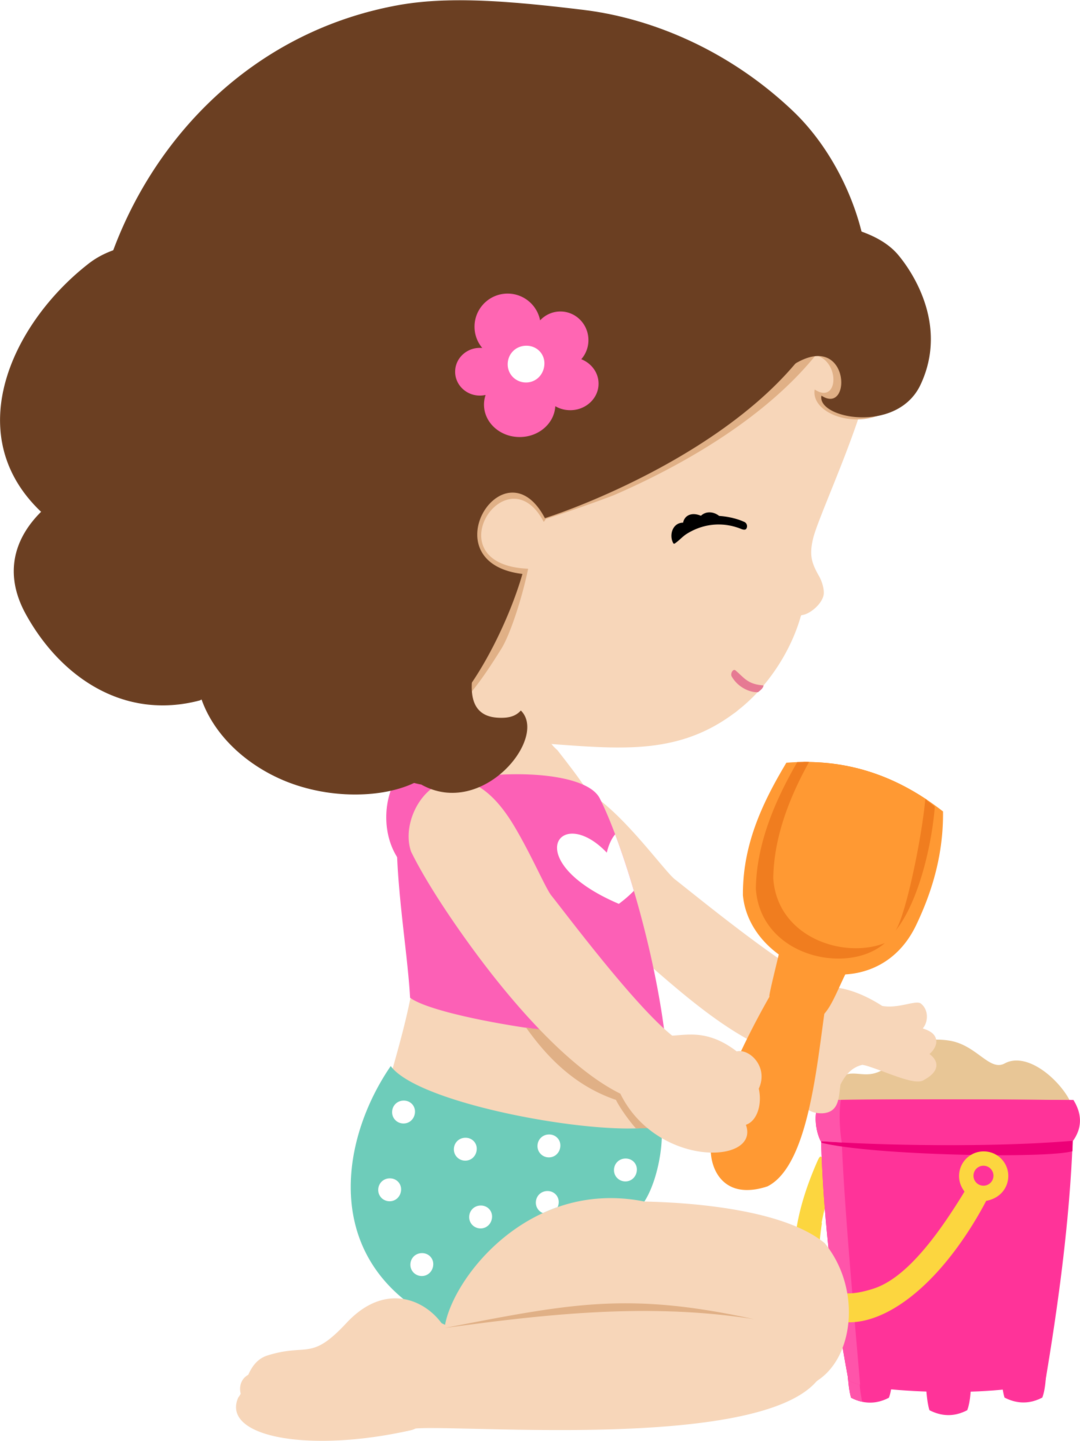 Cartoon Child Playing With Sand Bucket.png PNG image